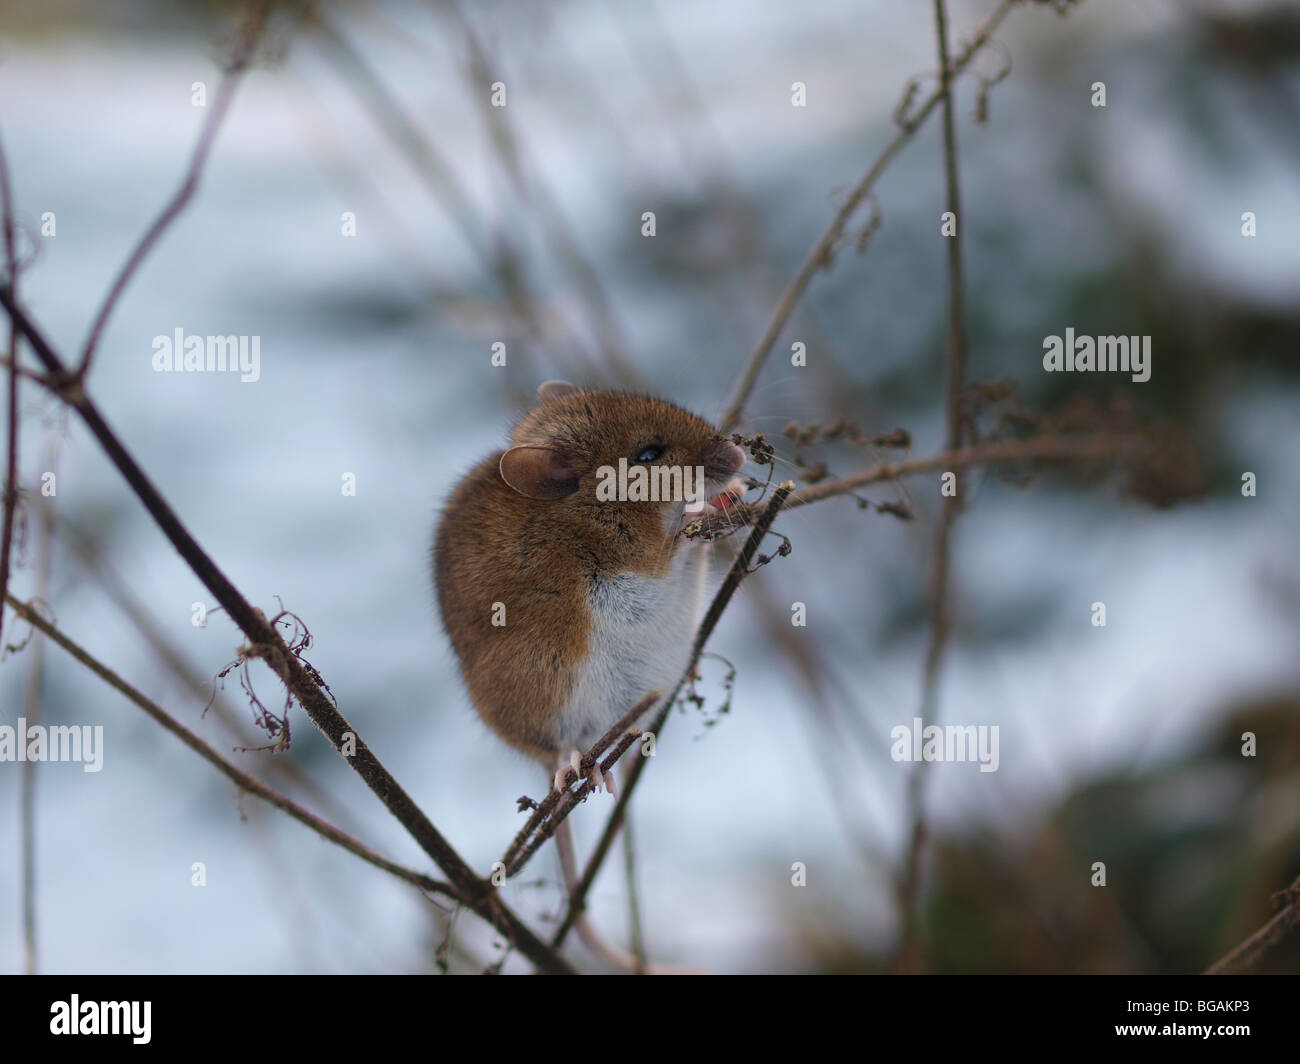 Woodmouse feeding in December balanced on branch. Stock Photo